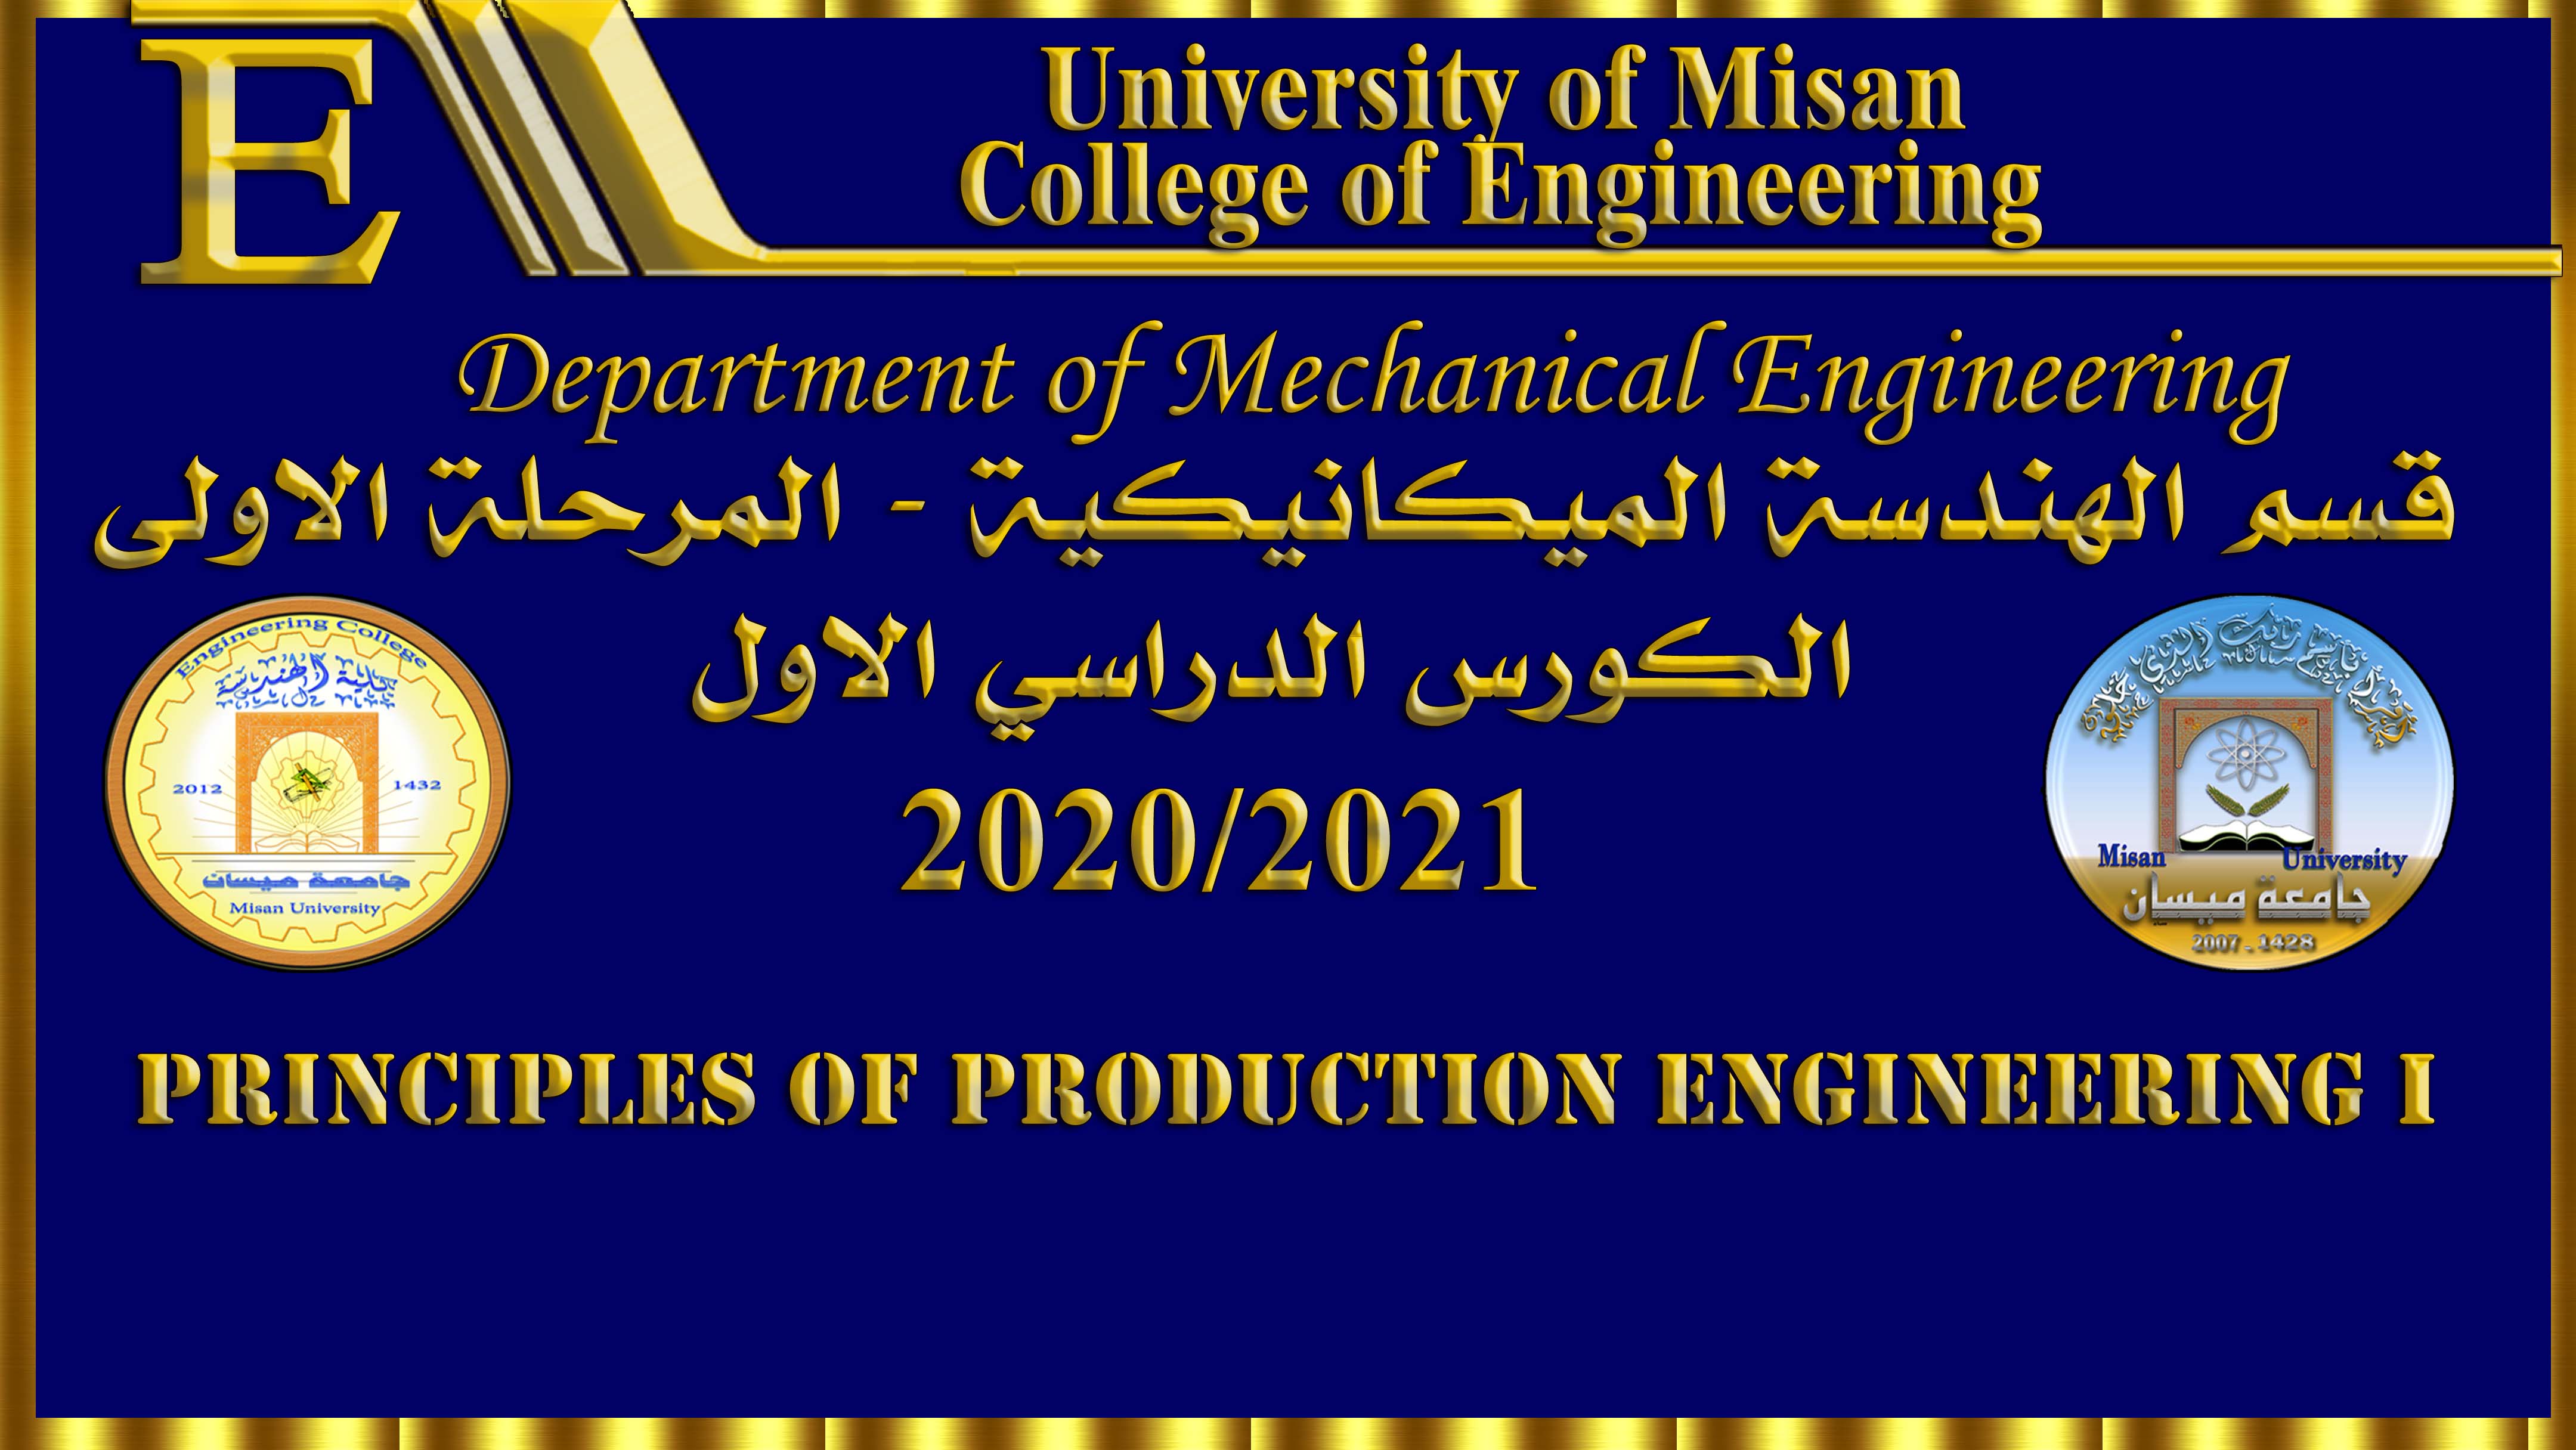 Principles of Production Engineering I